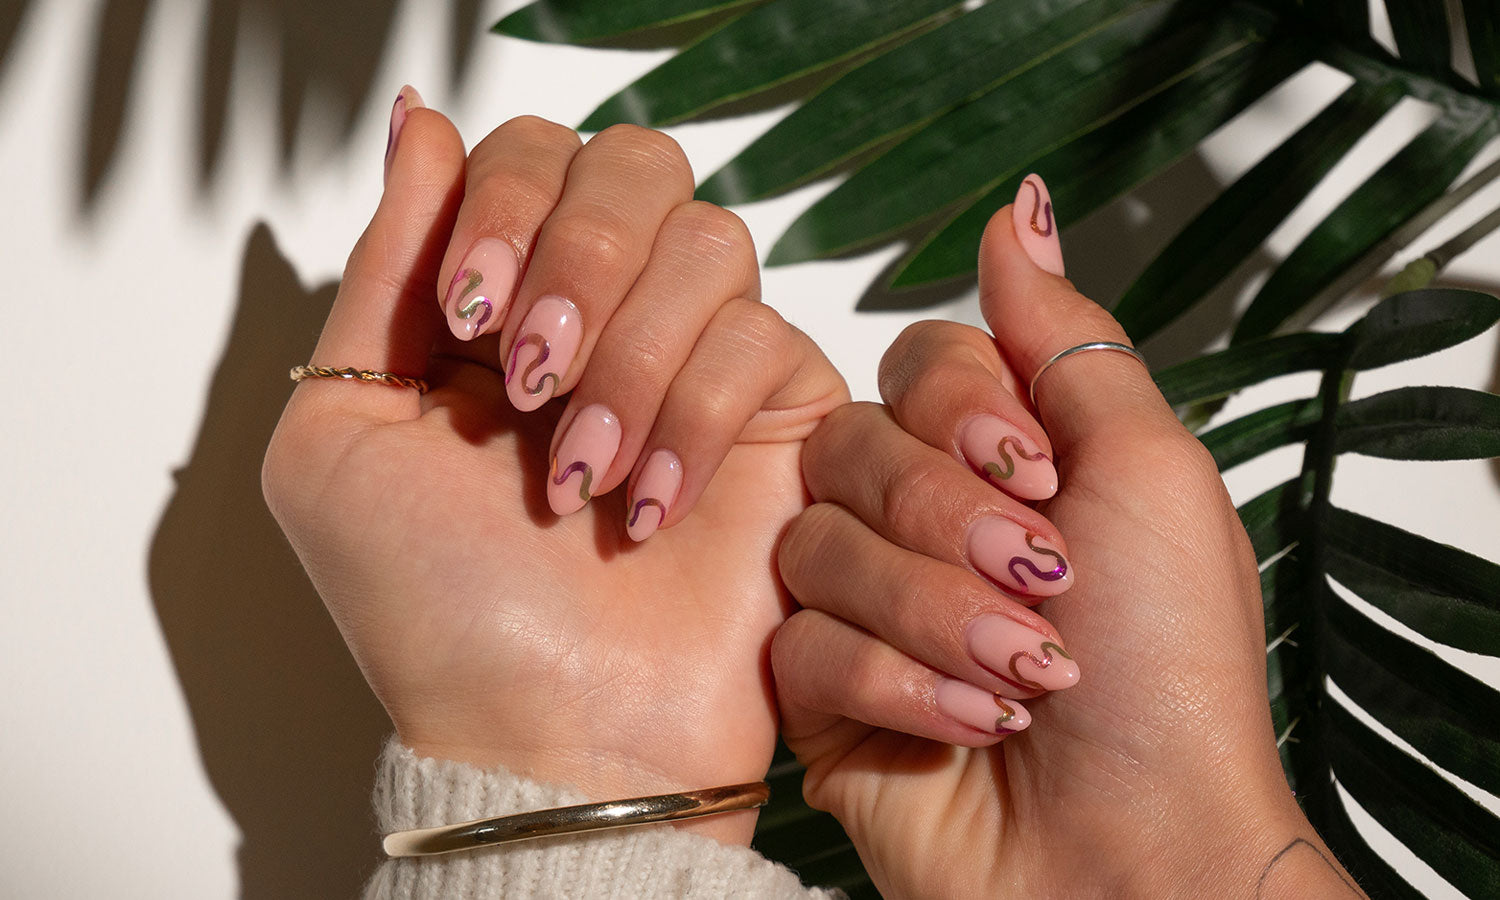 Get your manicure to the next level with Booming Nail & Hand Care - always  inspiring more